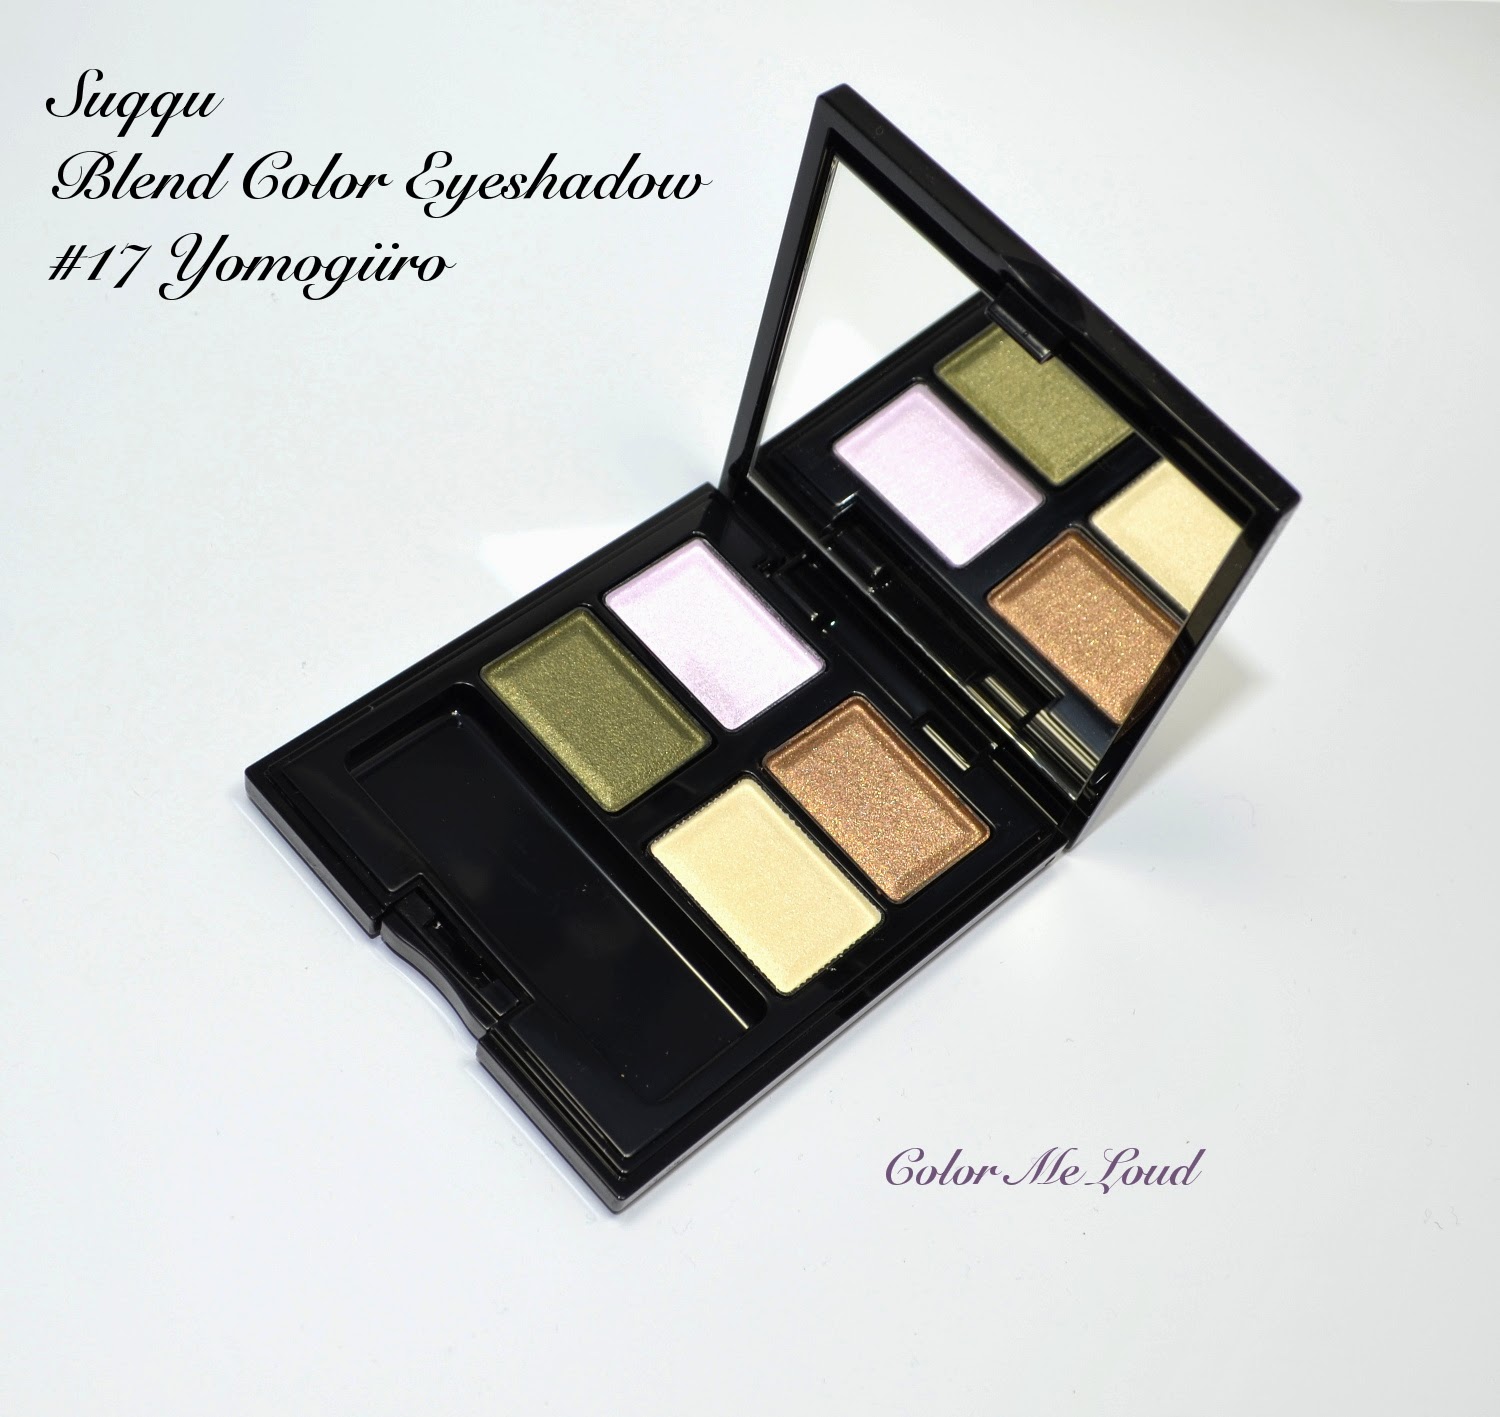 Suqqu Blend Color Eyeshadow #17 Yomogiiro for Spring 2014, FOTD, Swatch & Review